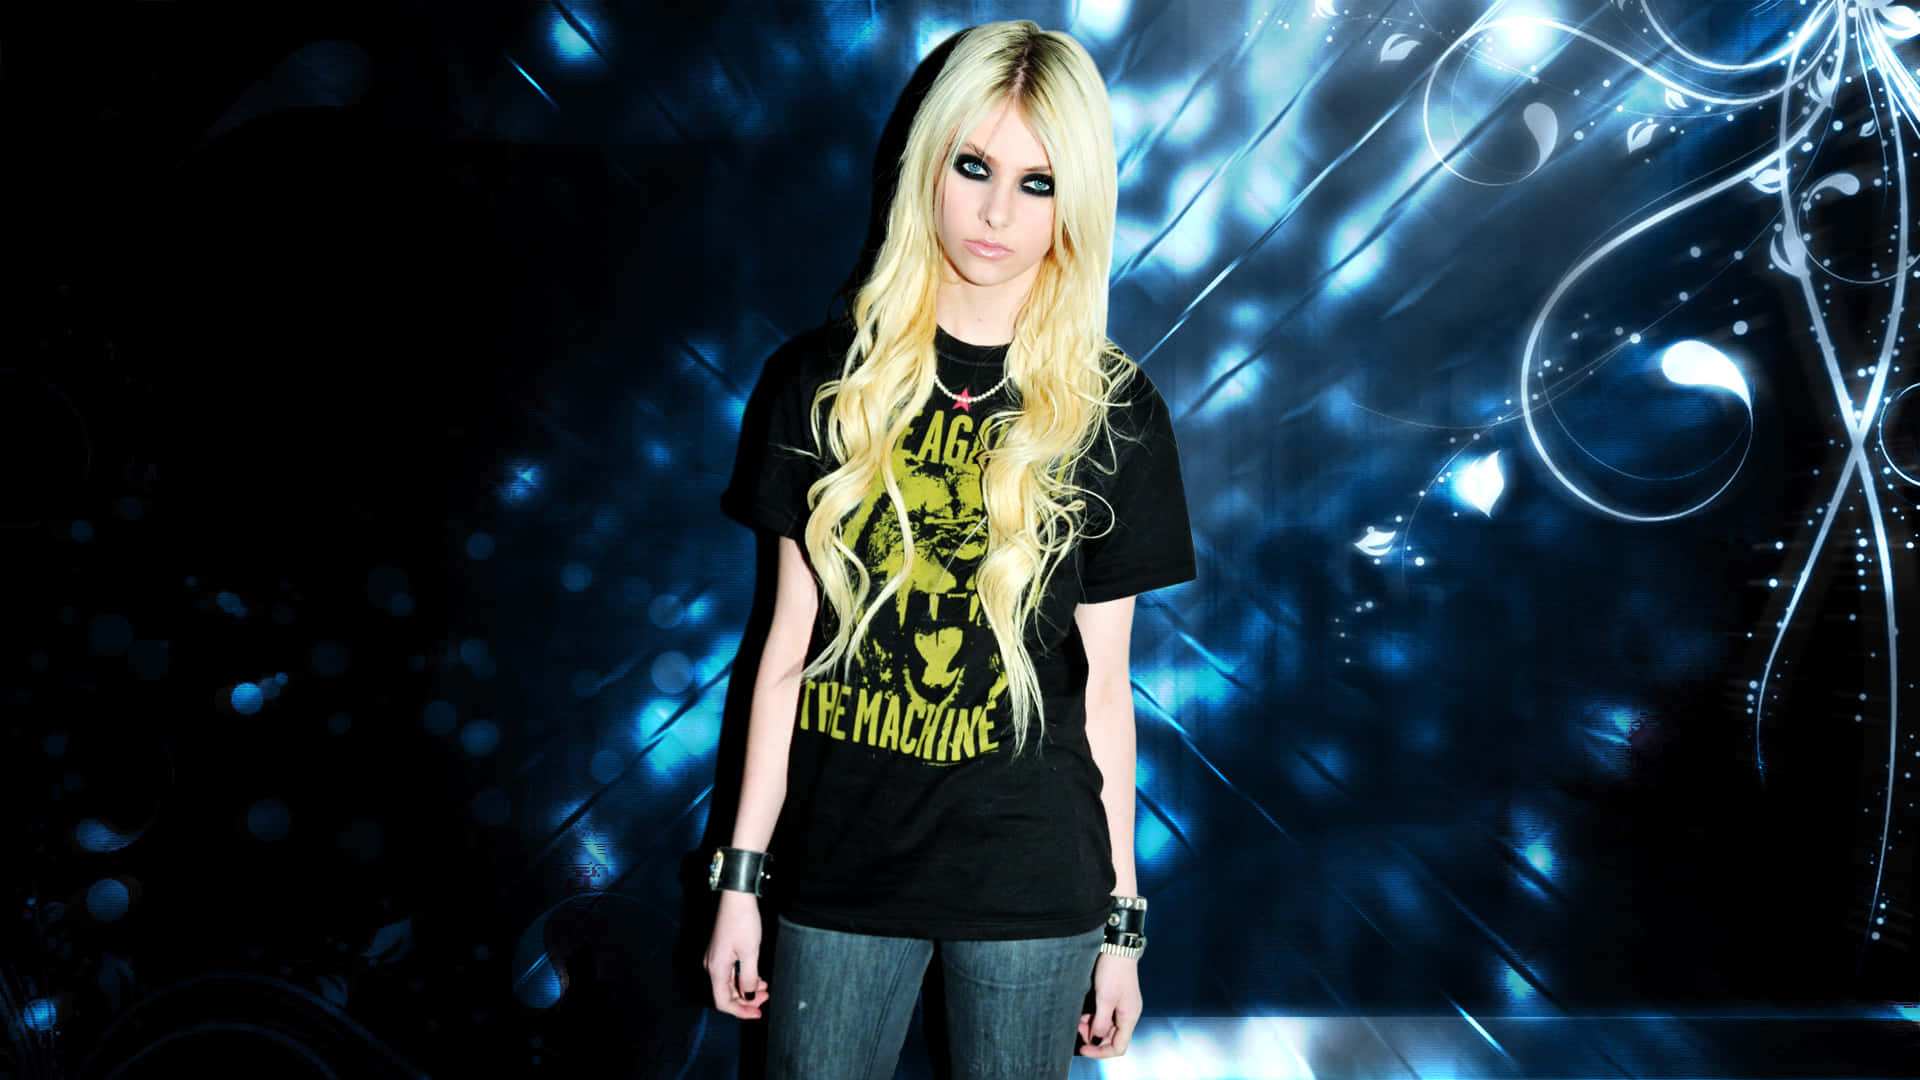 Lead Singer Of The Pretty Reckless Band In Black Shirt Wallpaper